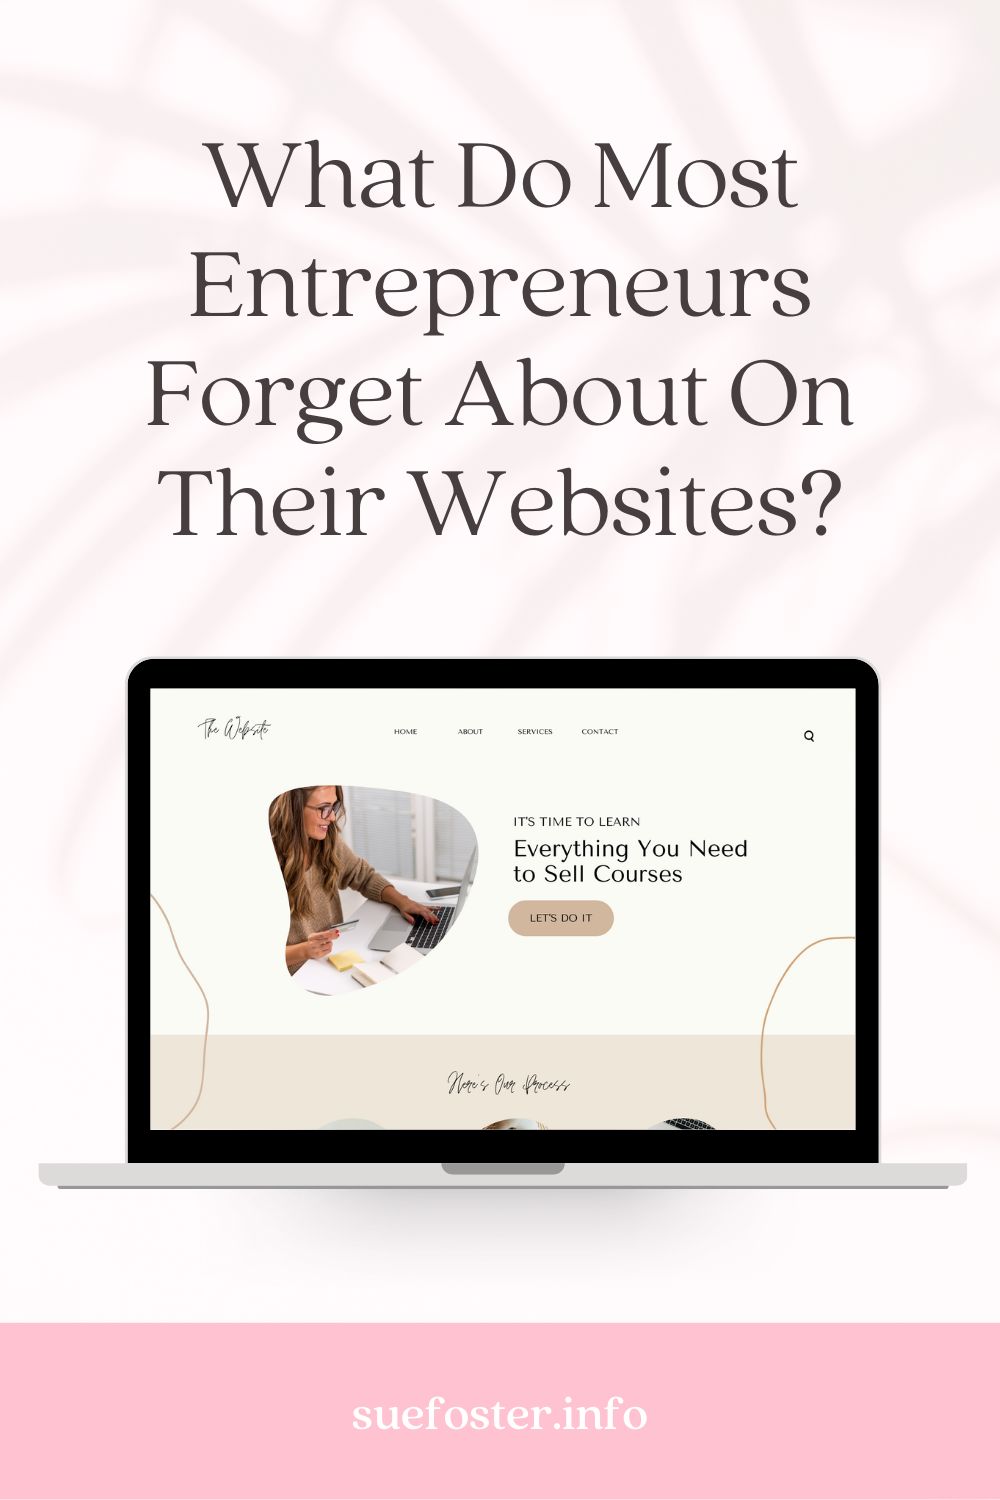 Essential website must-dos for entrepreneurs: Add a search bar, proofread content, boost security, provide contact details, and promote it effectively.